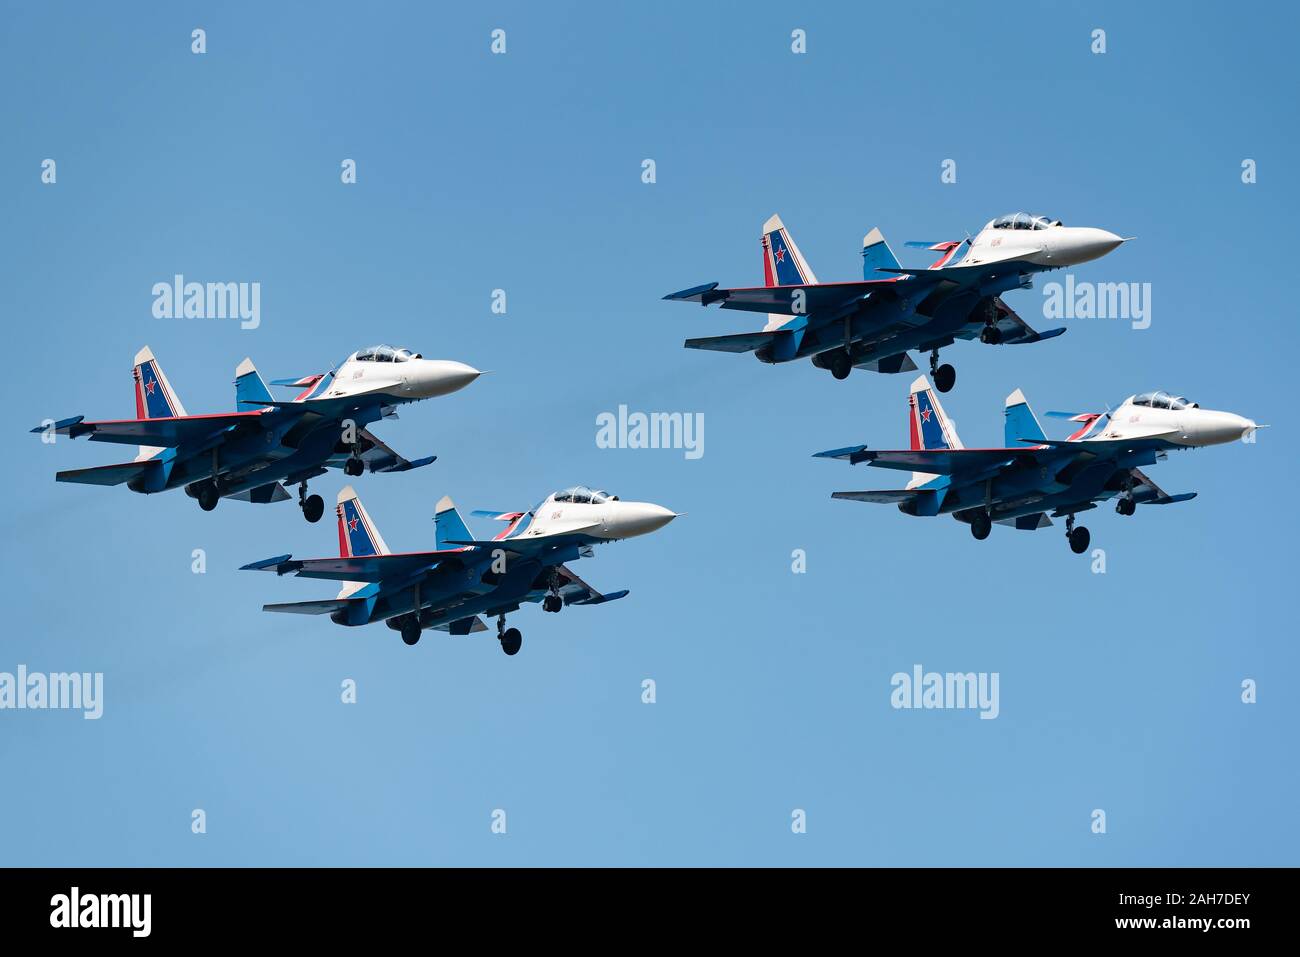 Sukhoi Su-30 jet fighter jets of the Russian Knights aerobatics team performing formation flight during MAKS 2019 airshow, Zhukovsky, Russia. Stock Photo